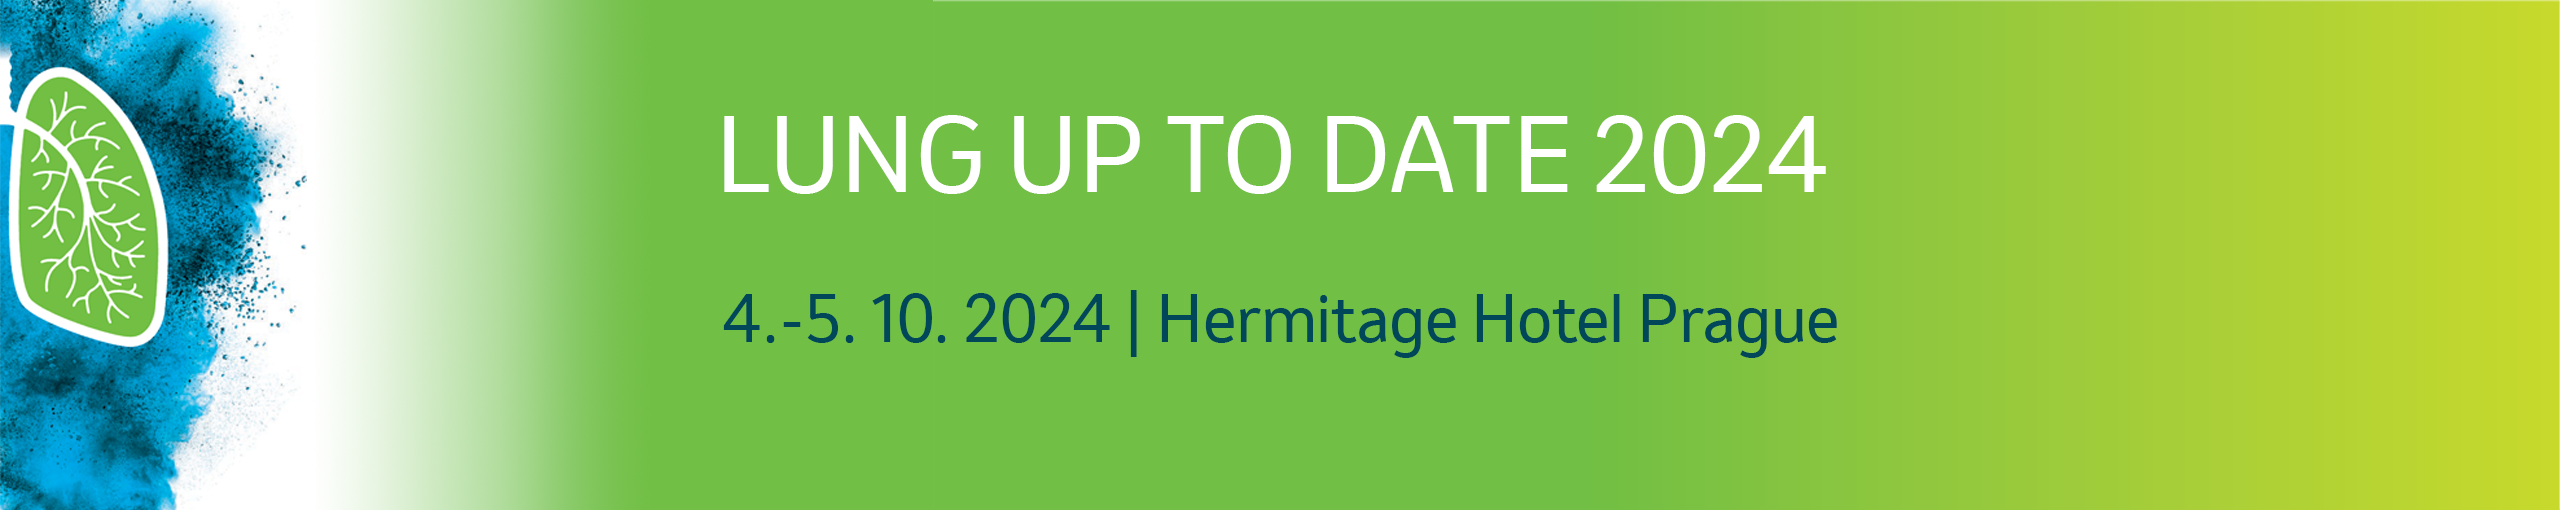 LUNG UP TO DATE 2024 4.-5. 10 2024 | Hermitage Hotel Prague